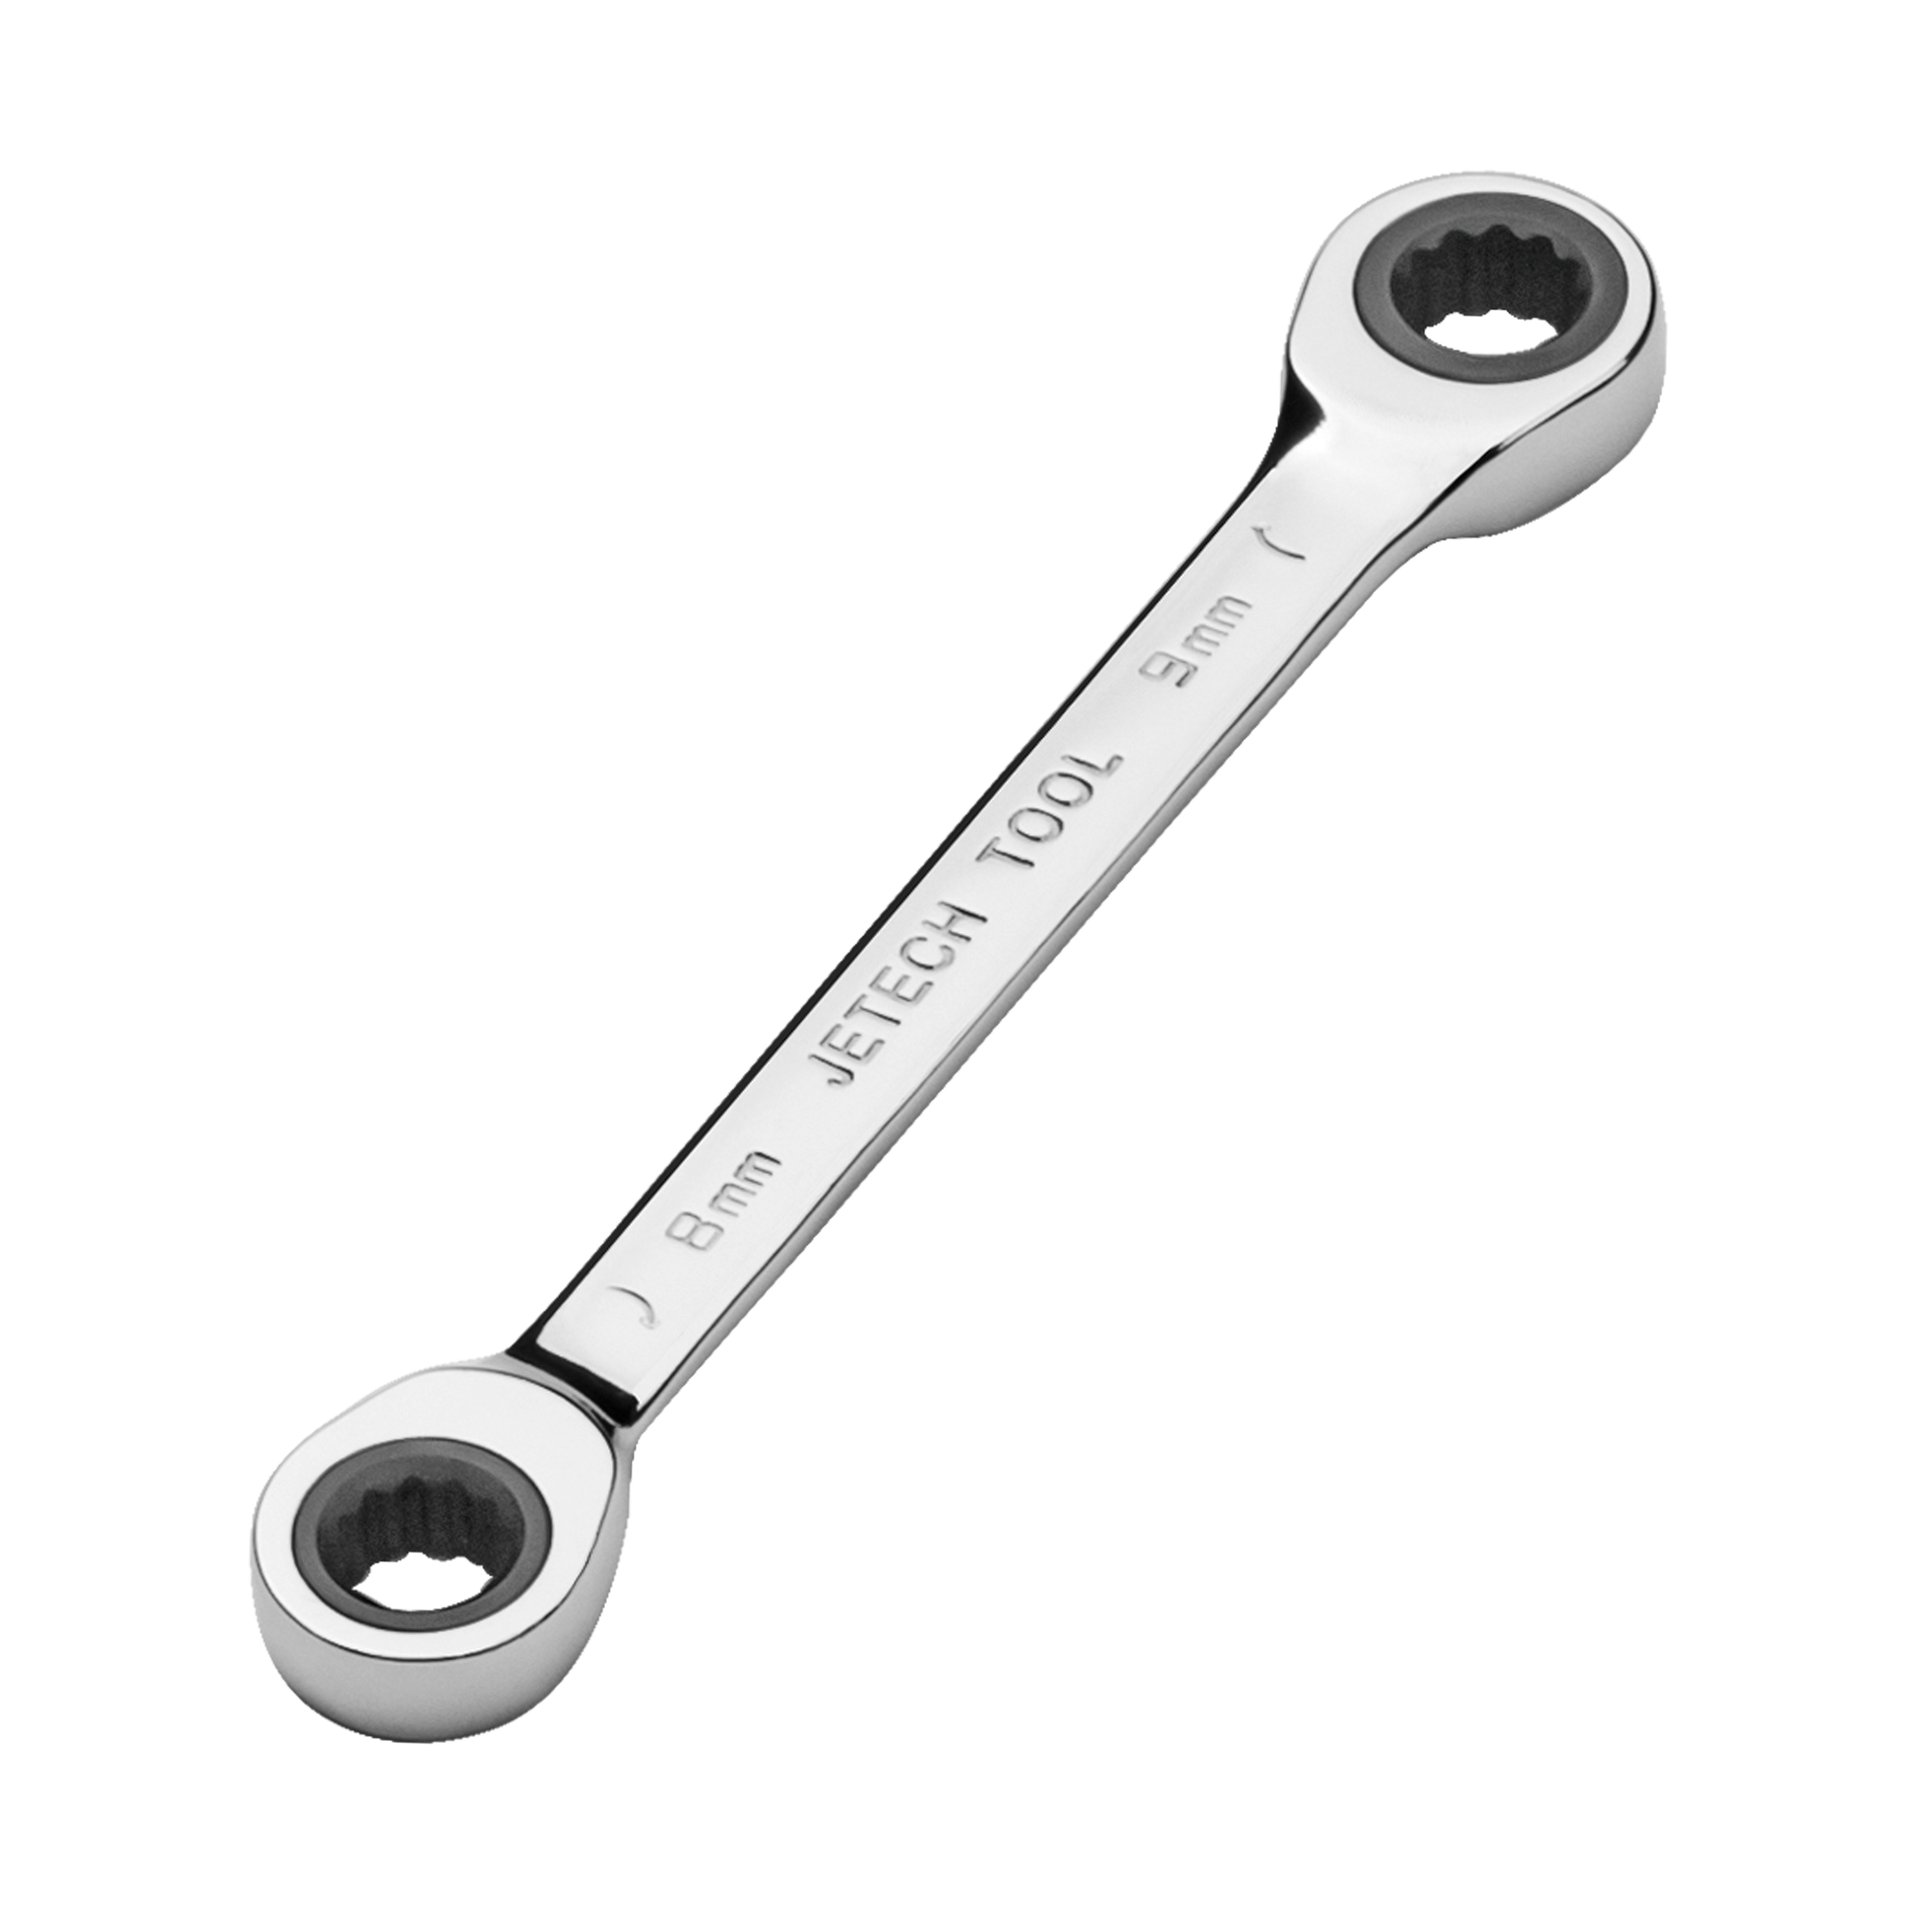 Jetech Double Box End Ratcheting Wrench (8mm x 9mm), Metric